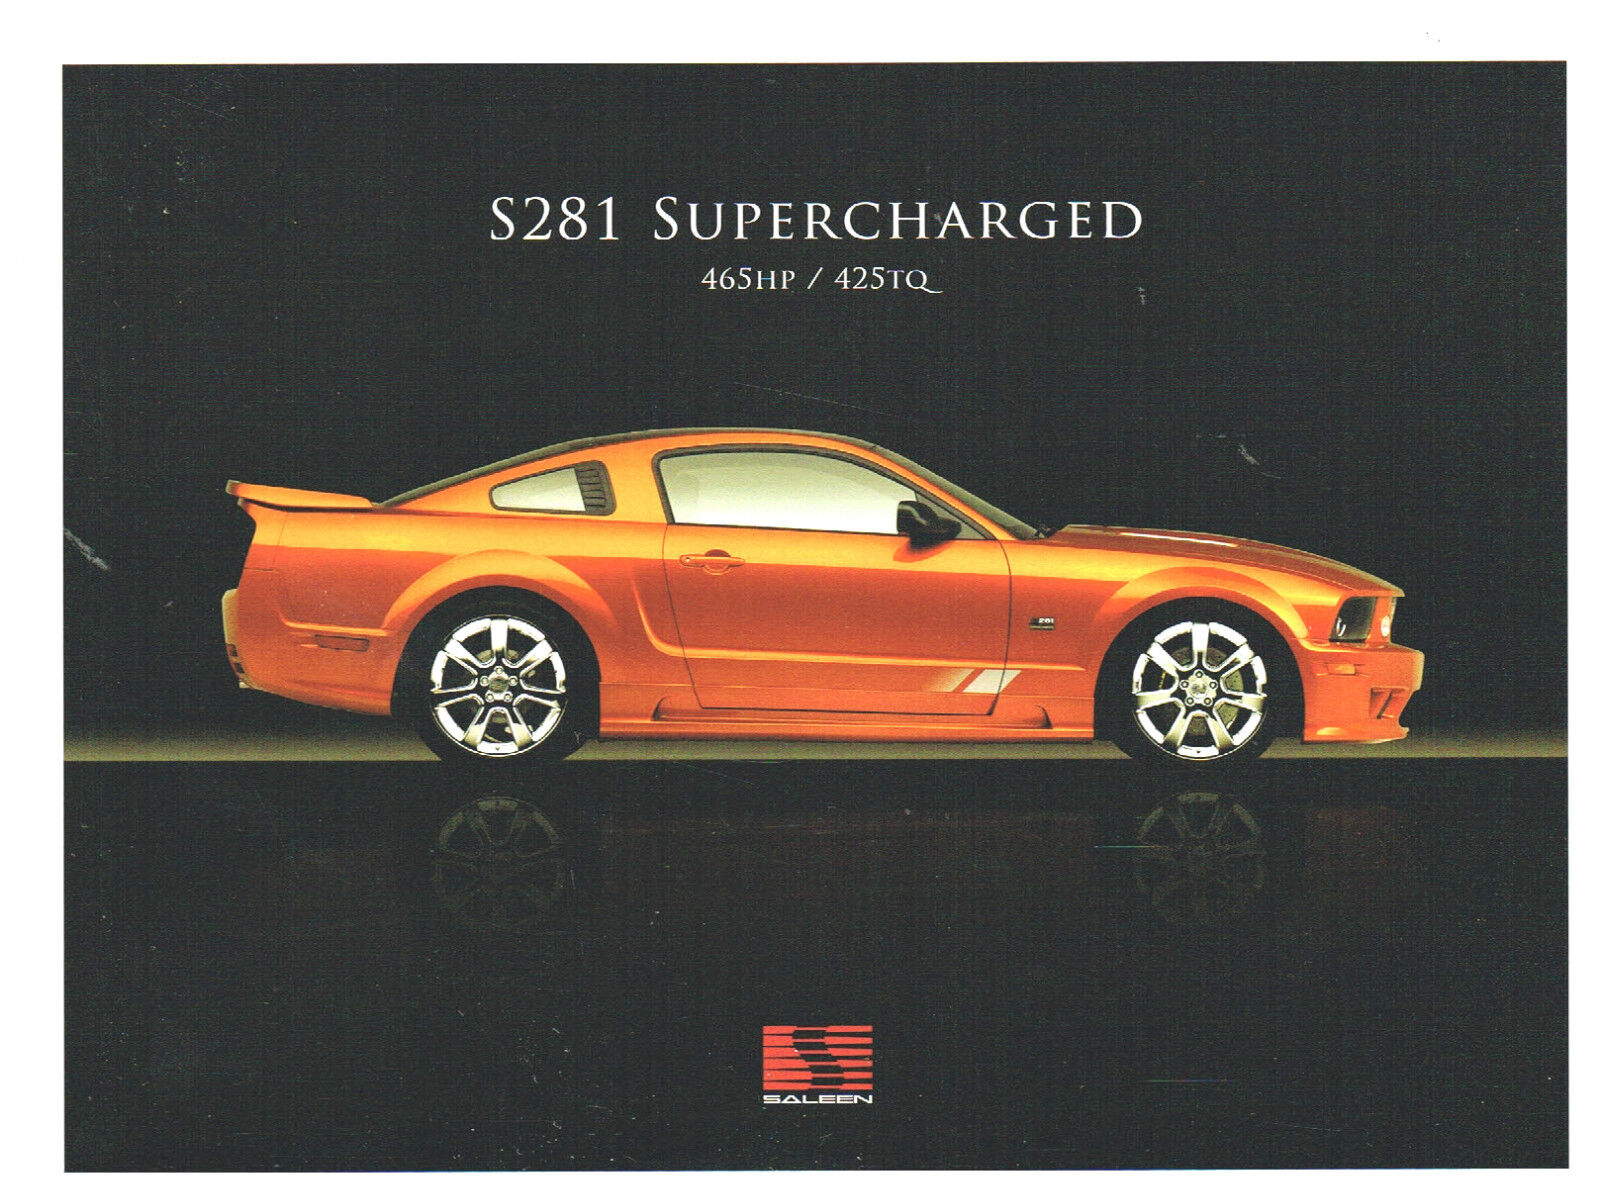 2007 Ford SALEEN MUSTANG SUPERCHARGED S281 / S-281 Brochure: 465 HP